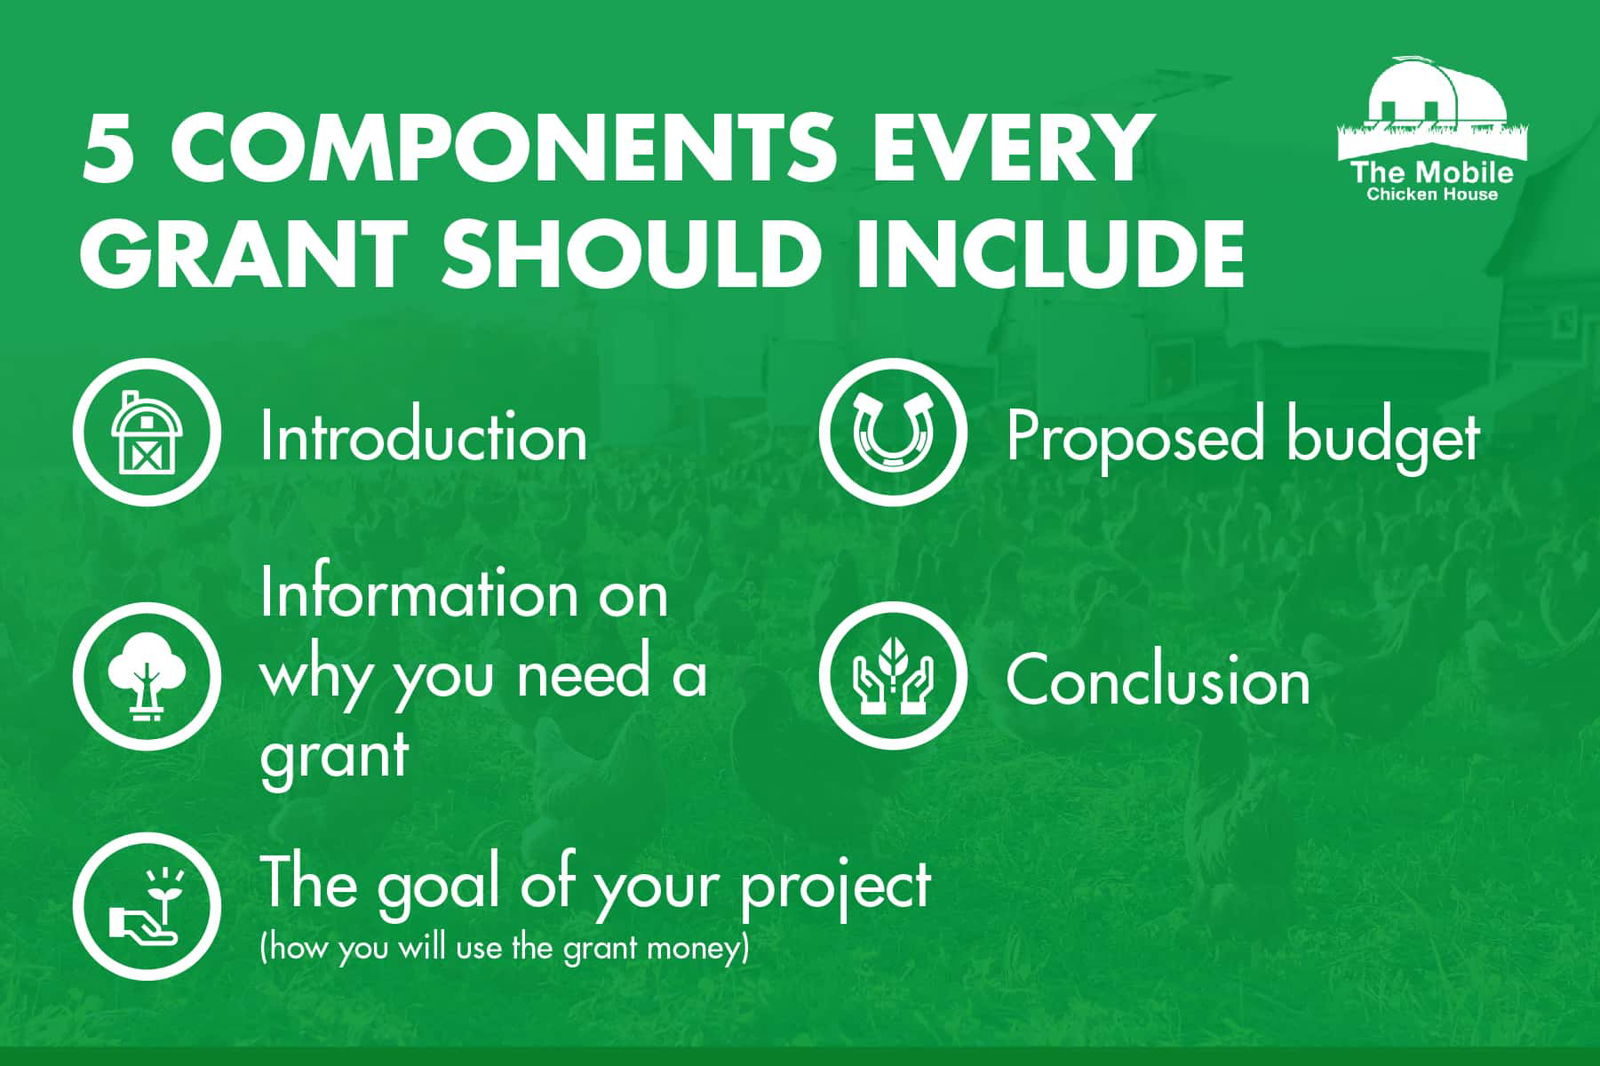 5 components every grant should include